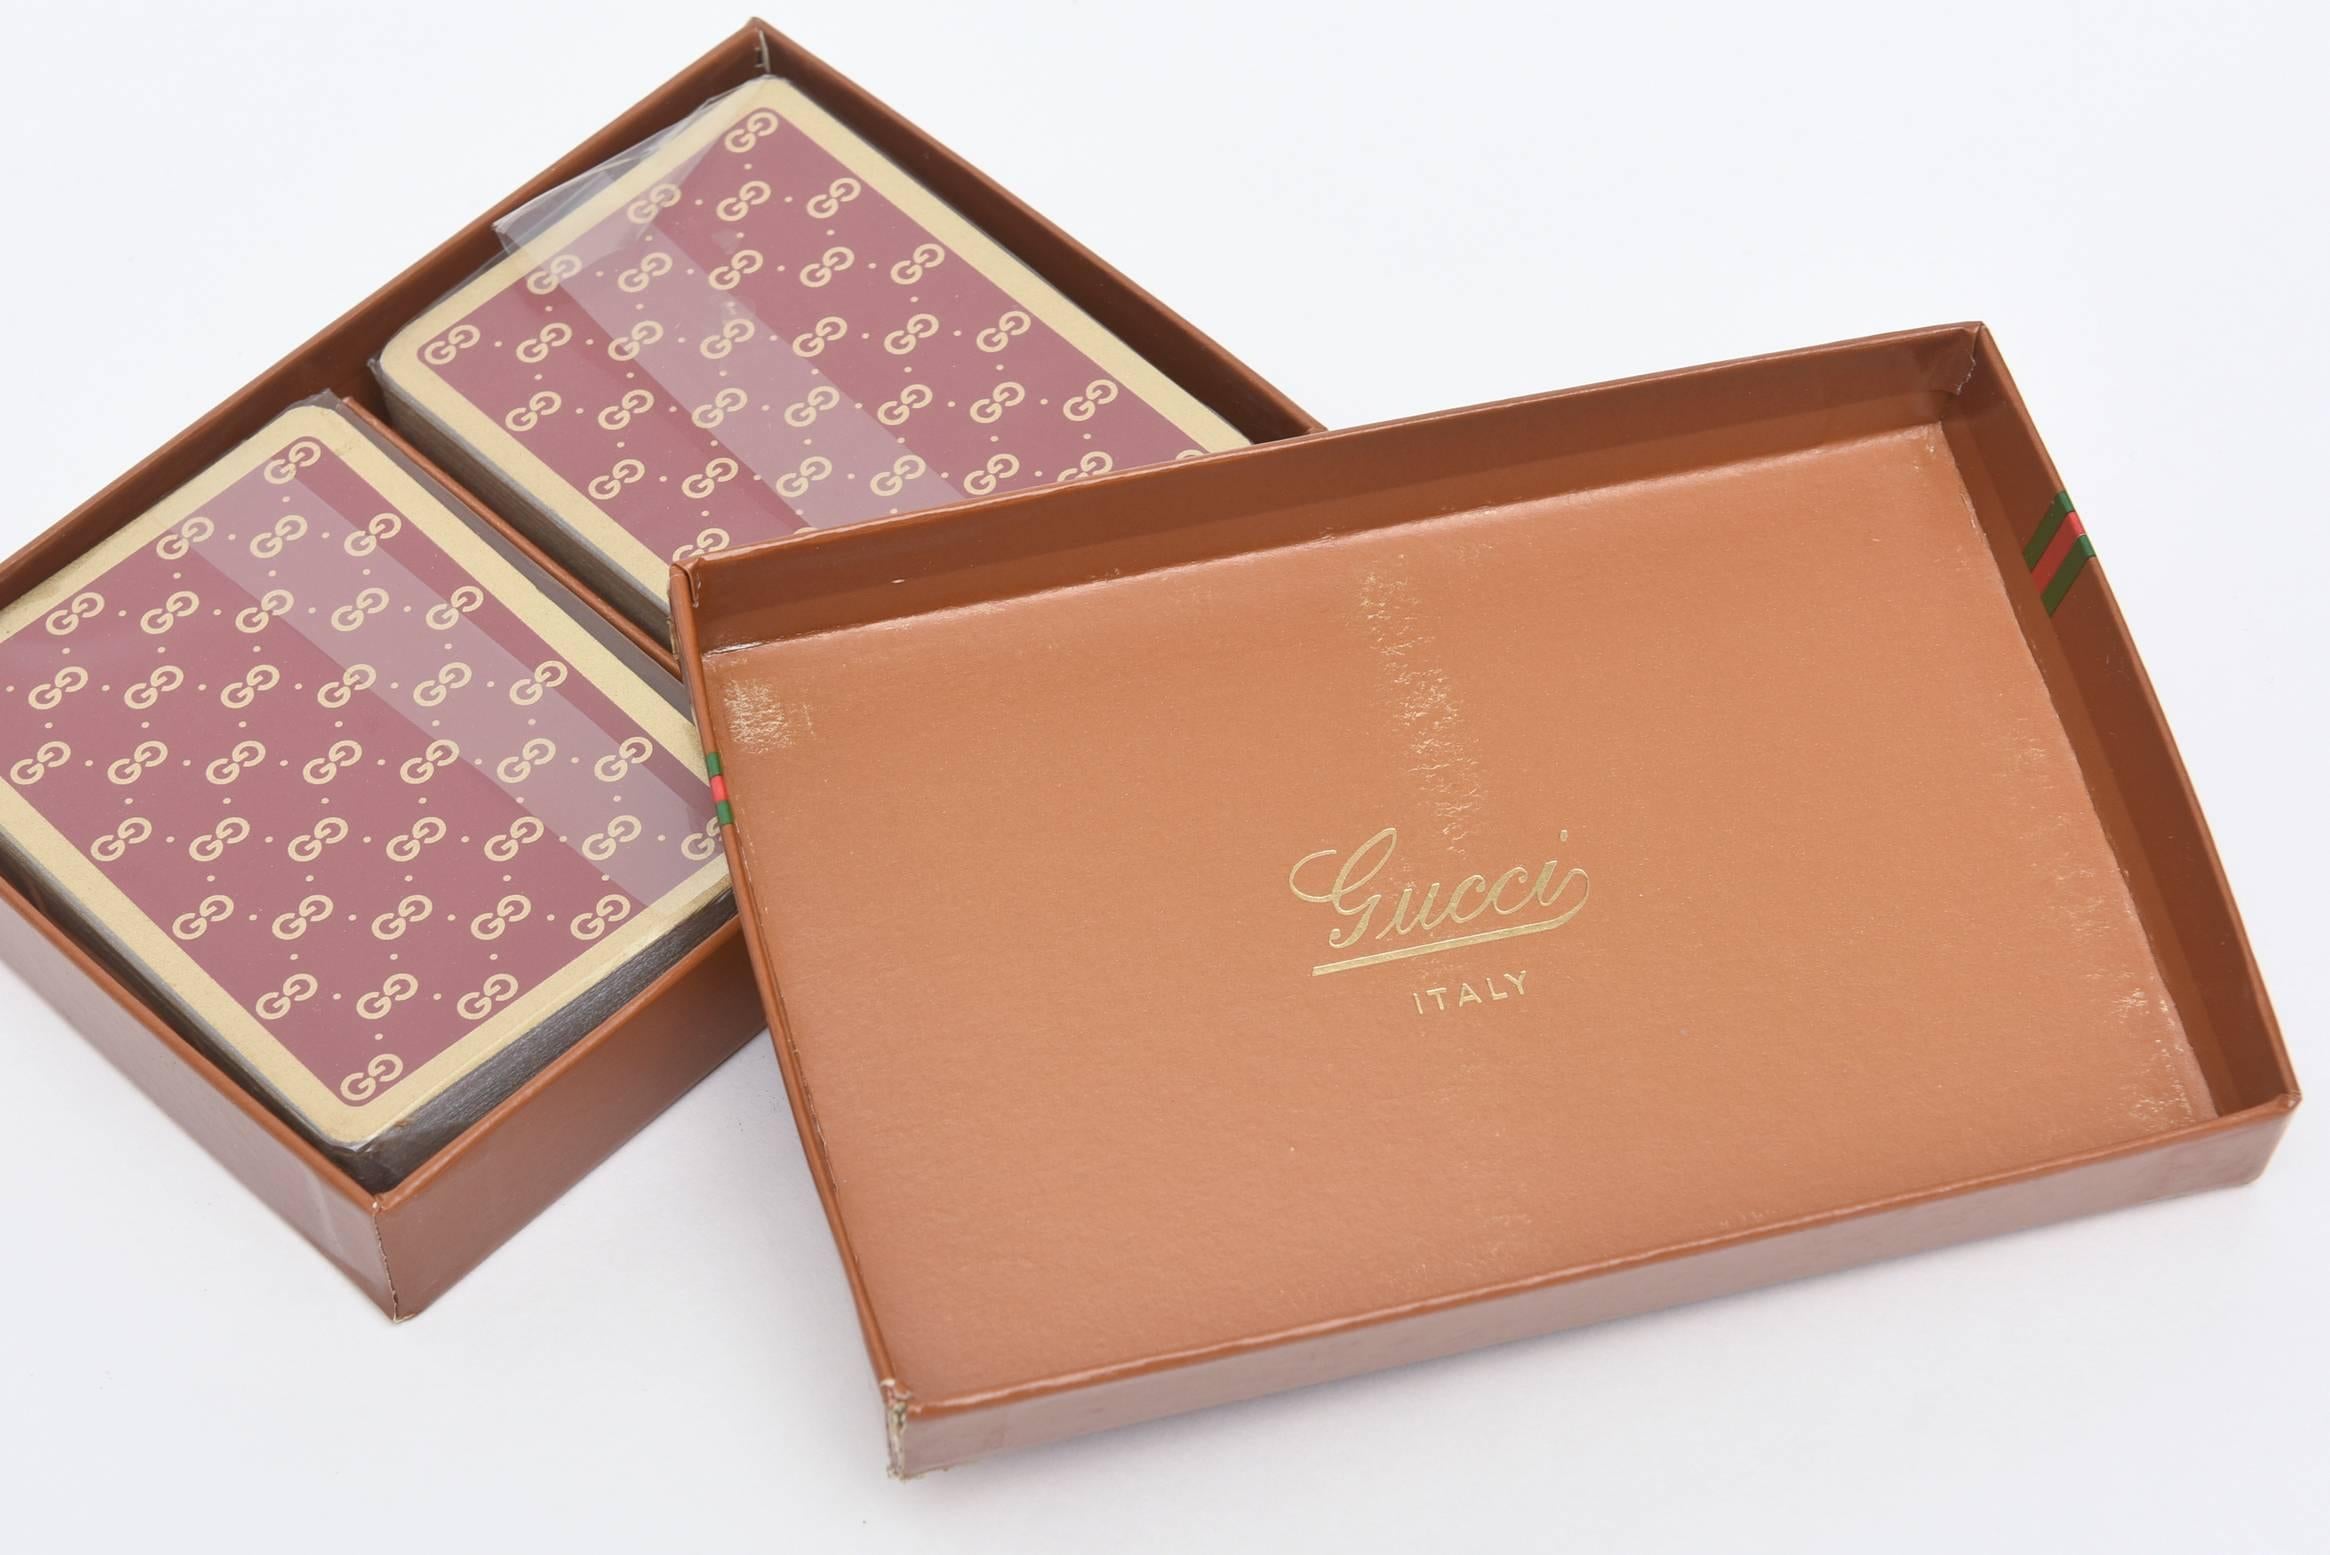 This lovely set of Vintage Gucci playing cards has not been opened. They are in a beautiful red/cranberry tone.
The iconic logo with the iconic banded colors of Gucci are on the top of the box.
The Gucci logo is on the paling with a gold band.
It